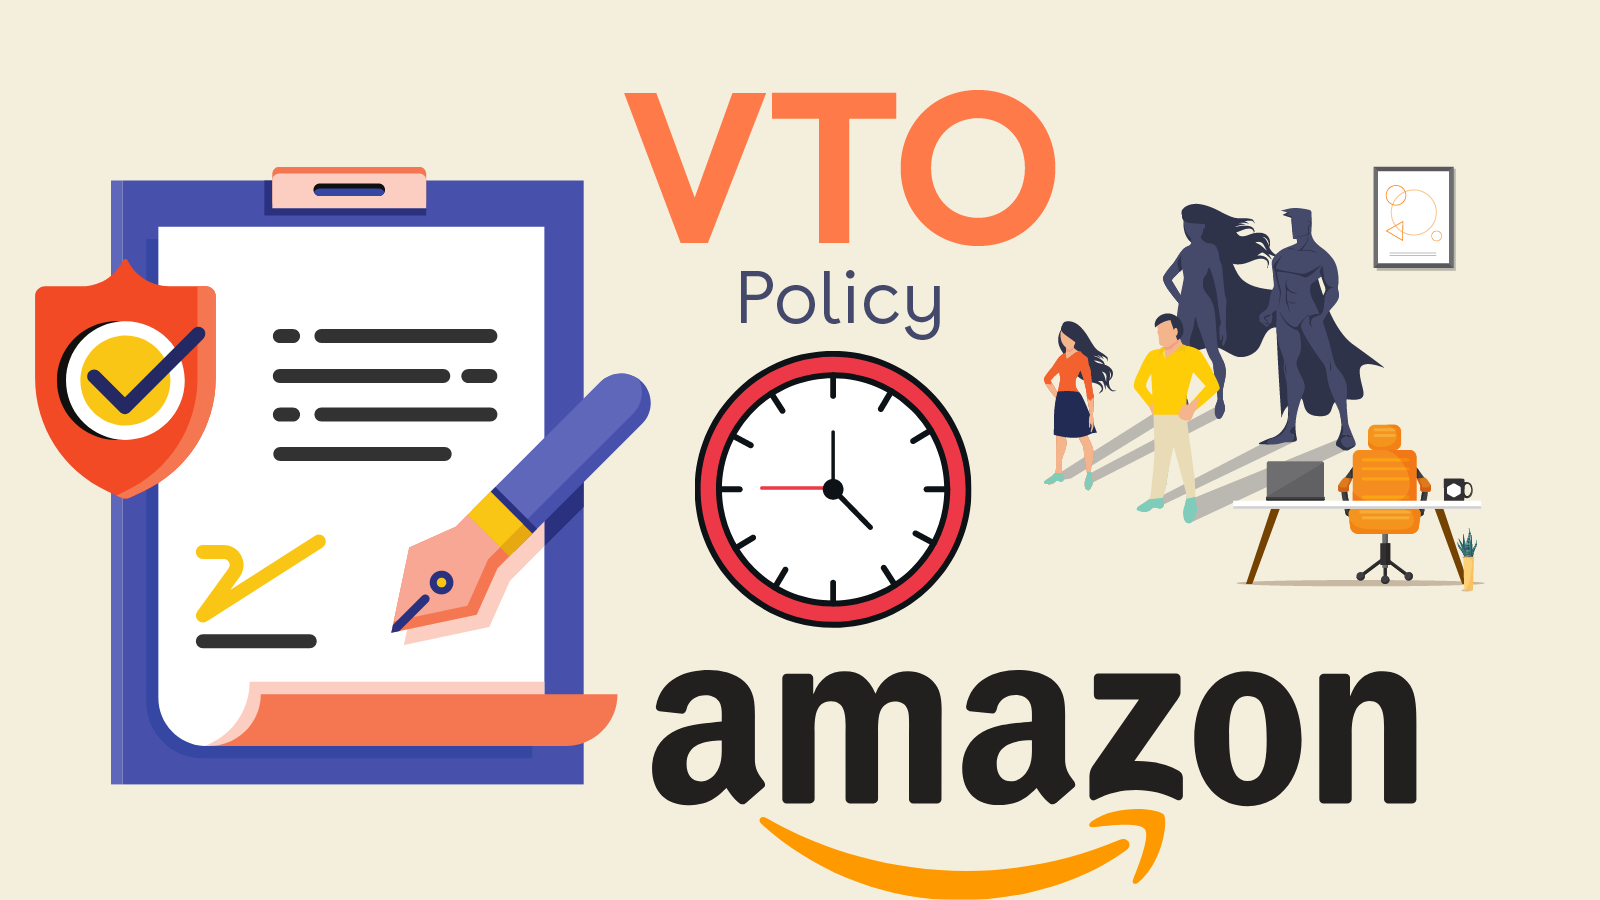 Amazon VTO Policy in 2022 – what is it and how does it work?